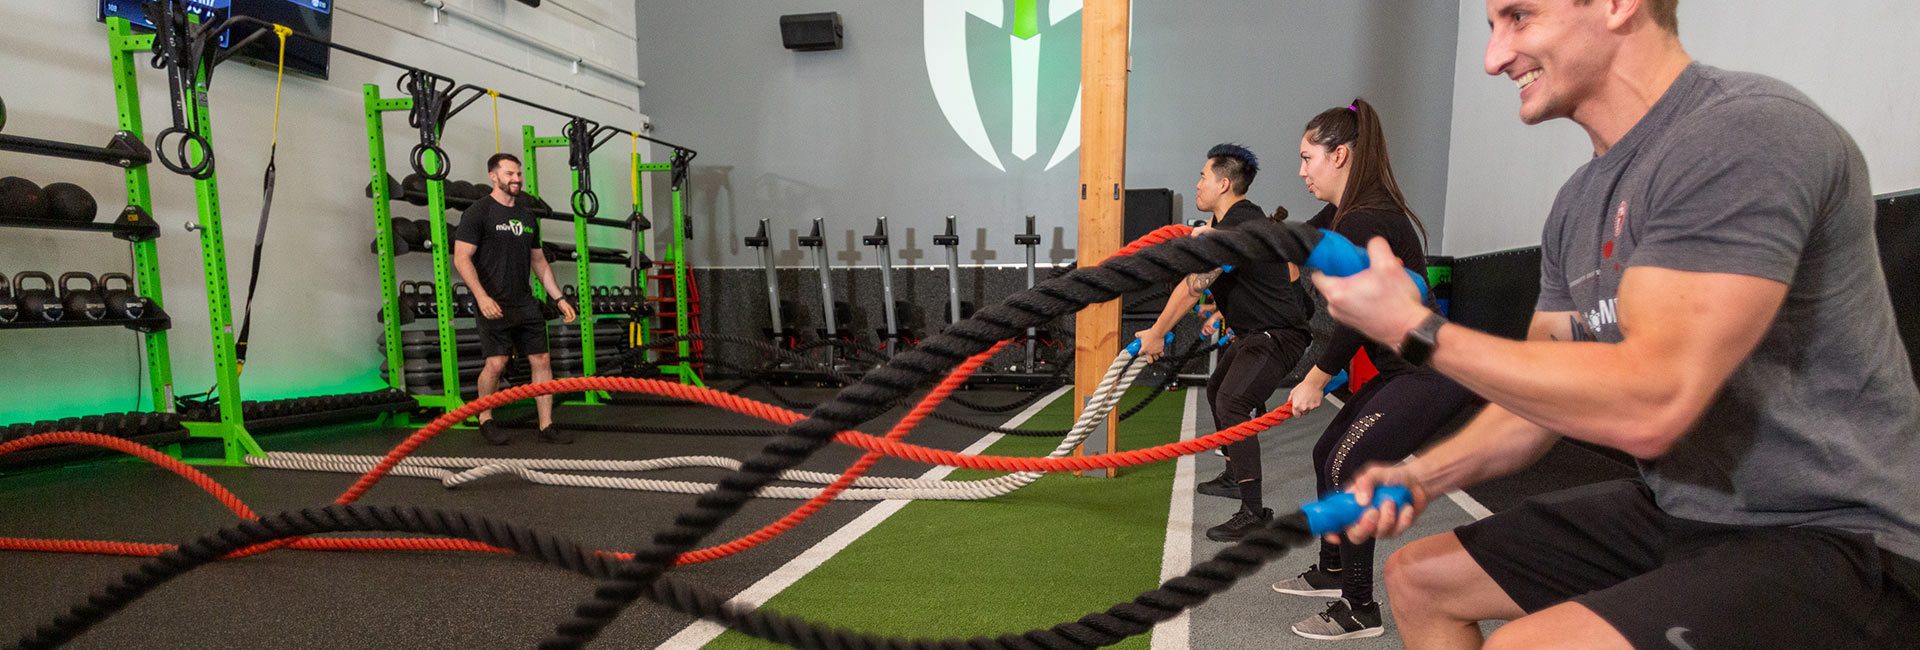 battle ropes training in gym near me